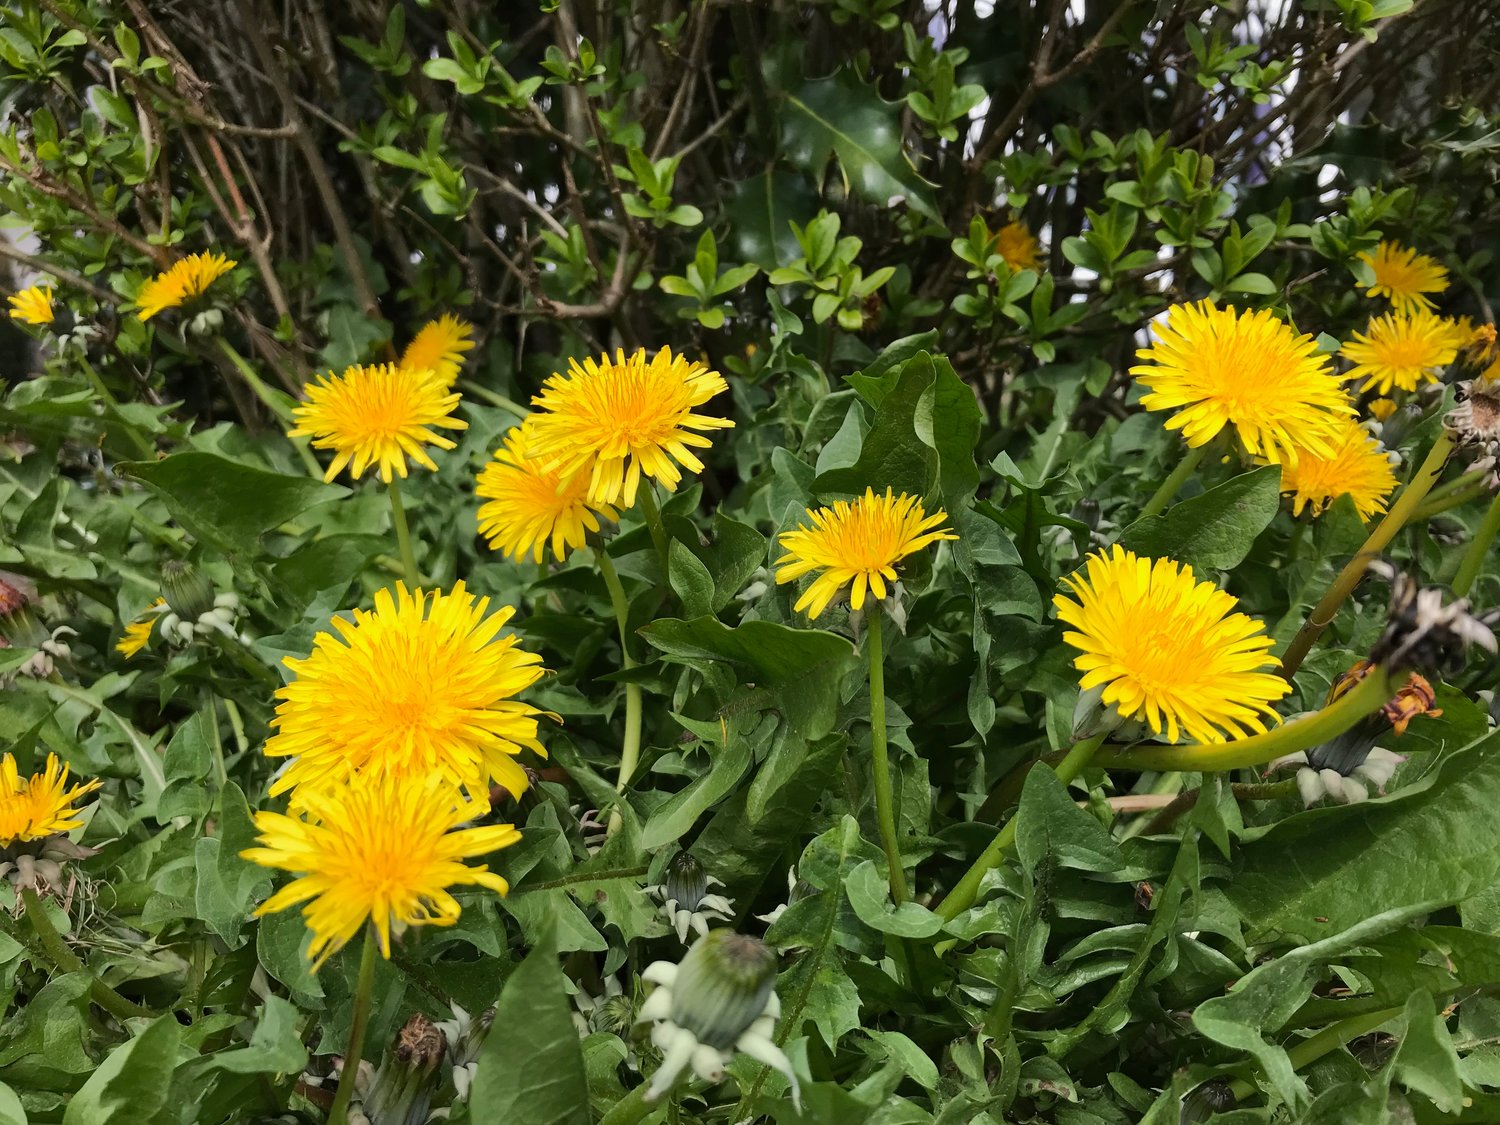 Here come the dandelions, right on schedule.